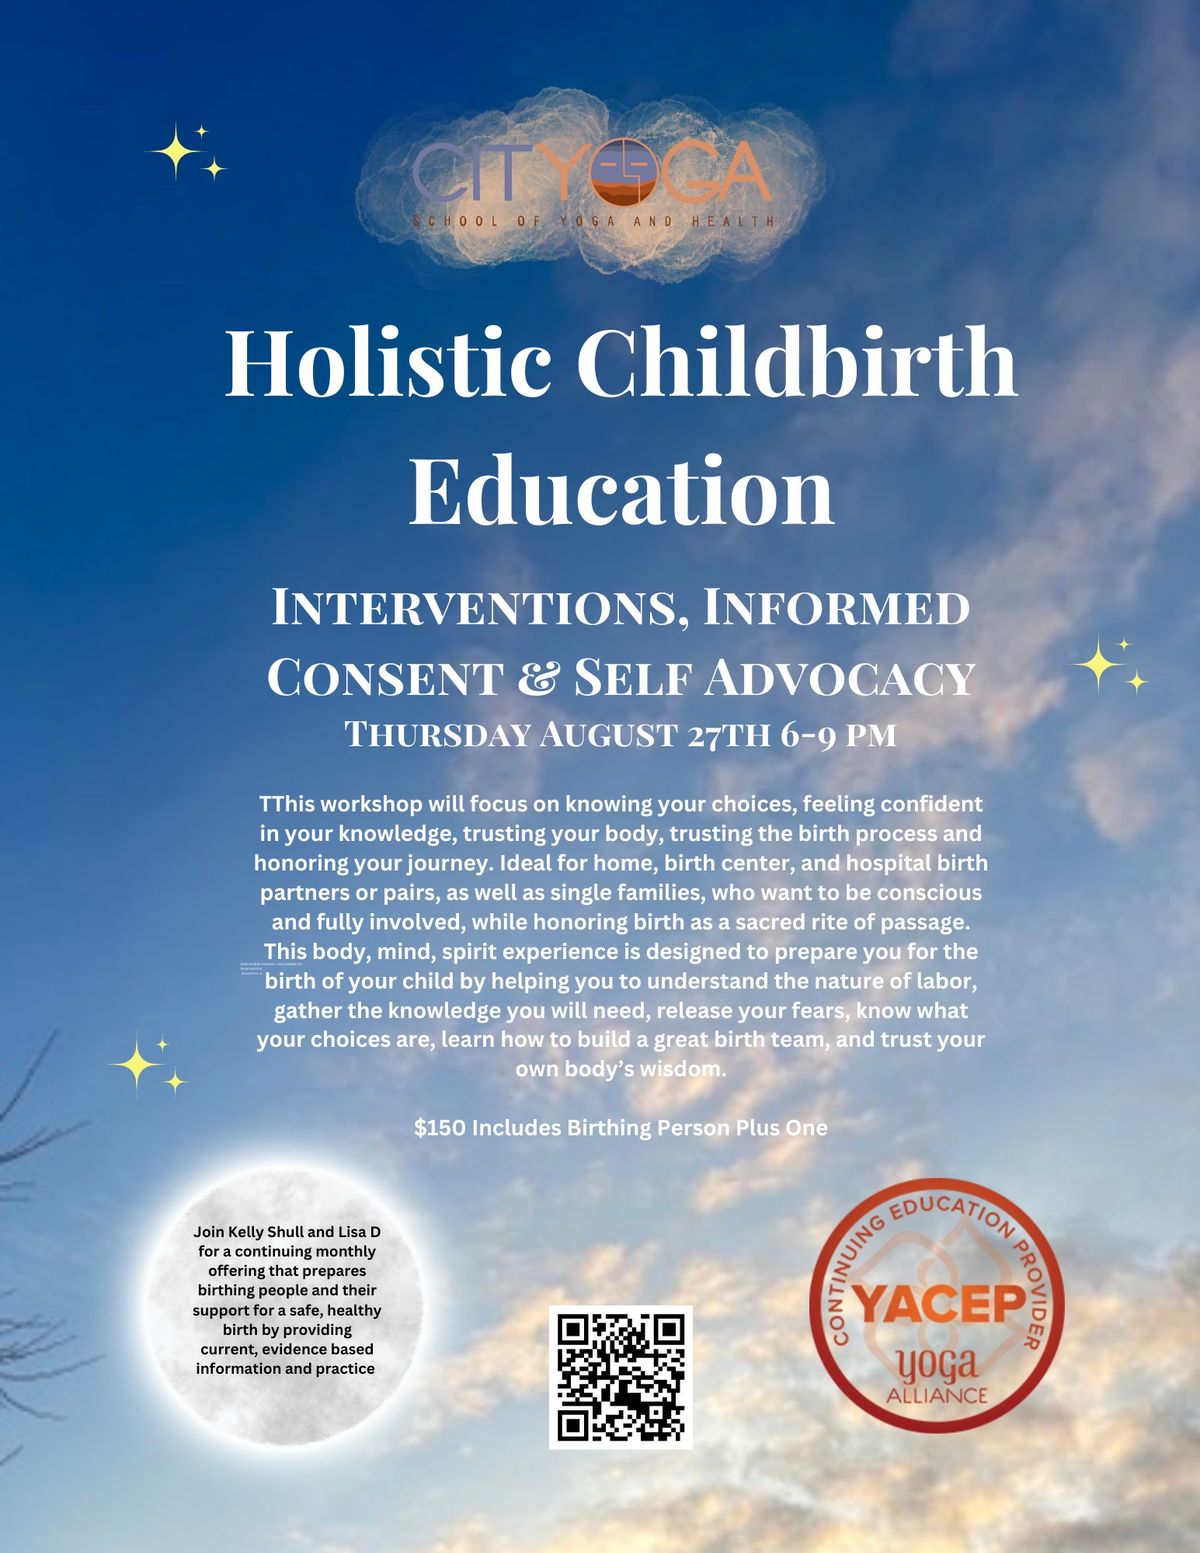 Holistic Childbirth Education: Interventions, Informed Consent & Self Advocacy with Kelly and Lisa D